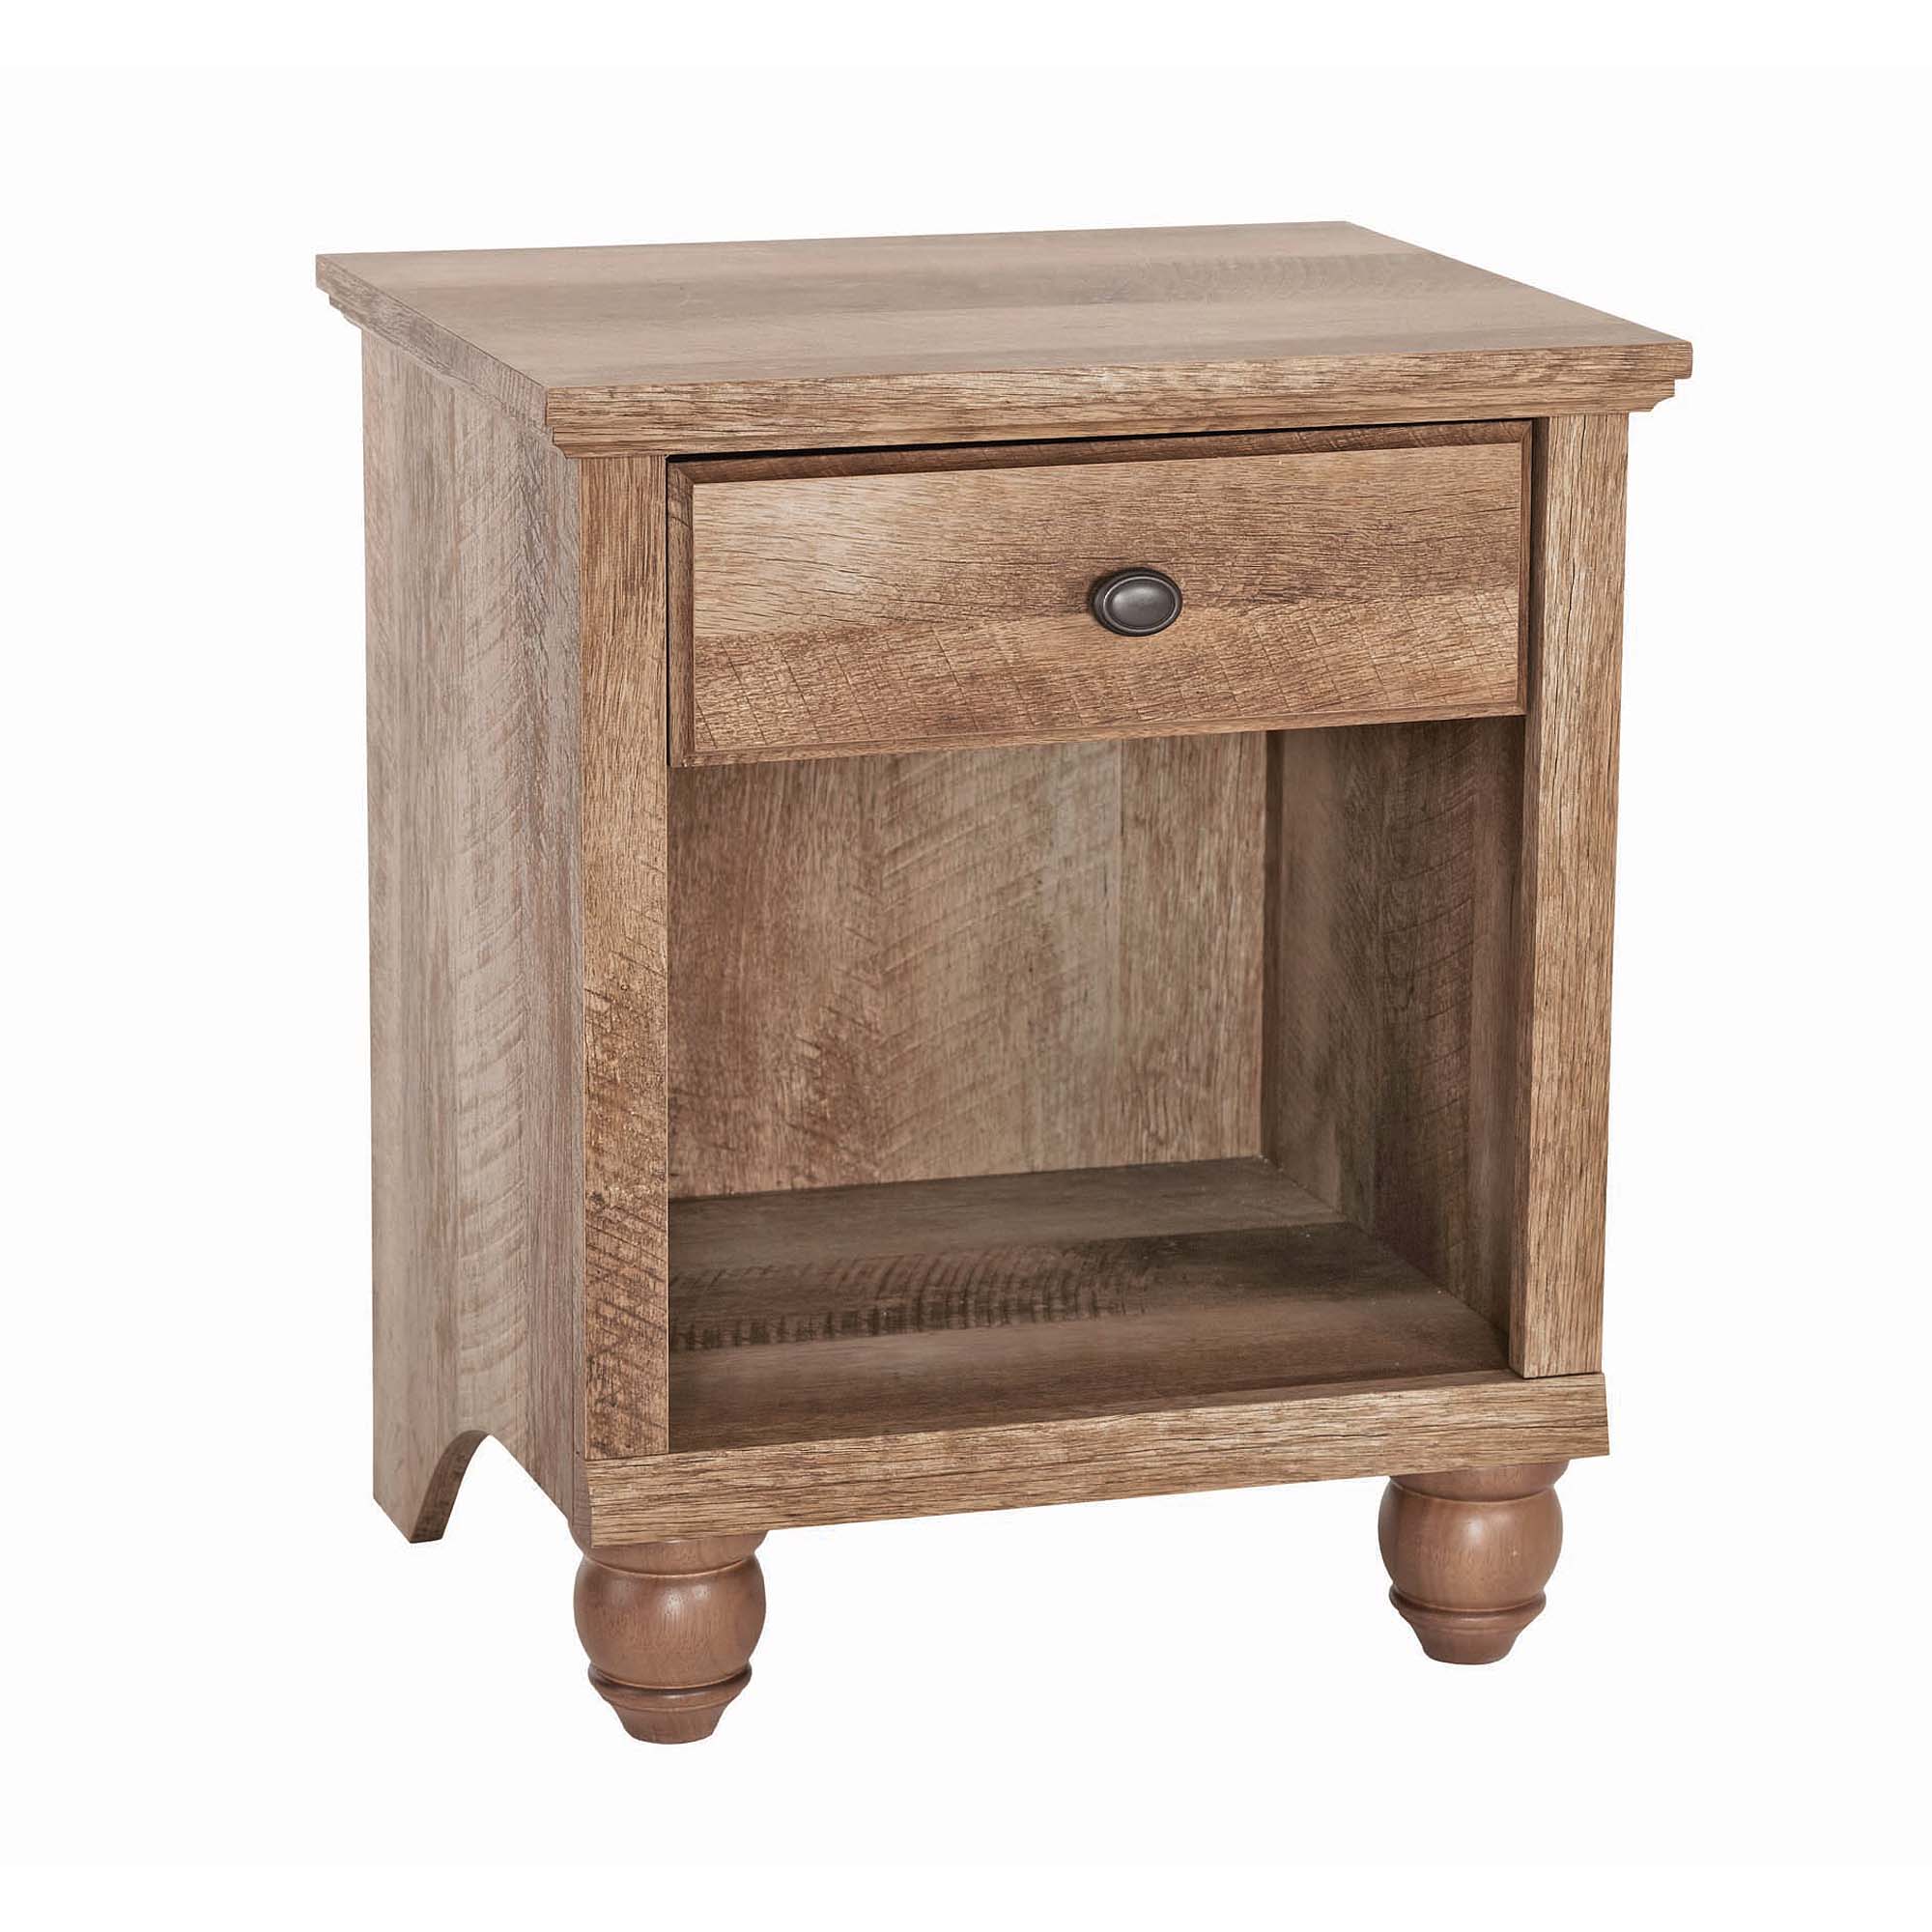 better homes gardens crossmill accent table weathered finish hadley with drawer small round gold end battery operated floor lights cabinet legs ashley furniture pub argos coffee